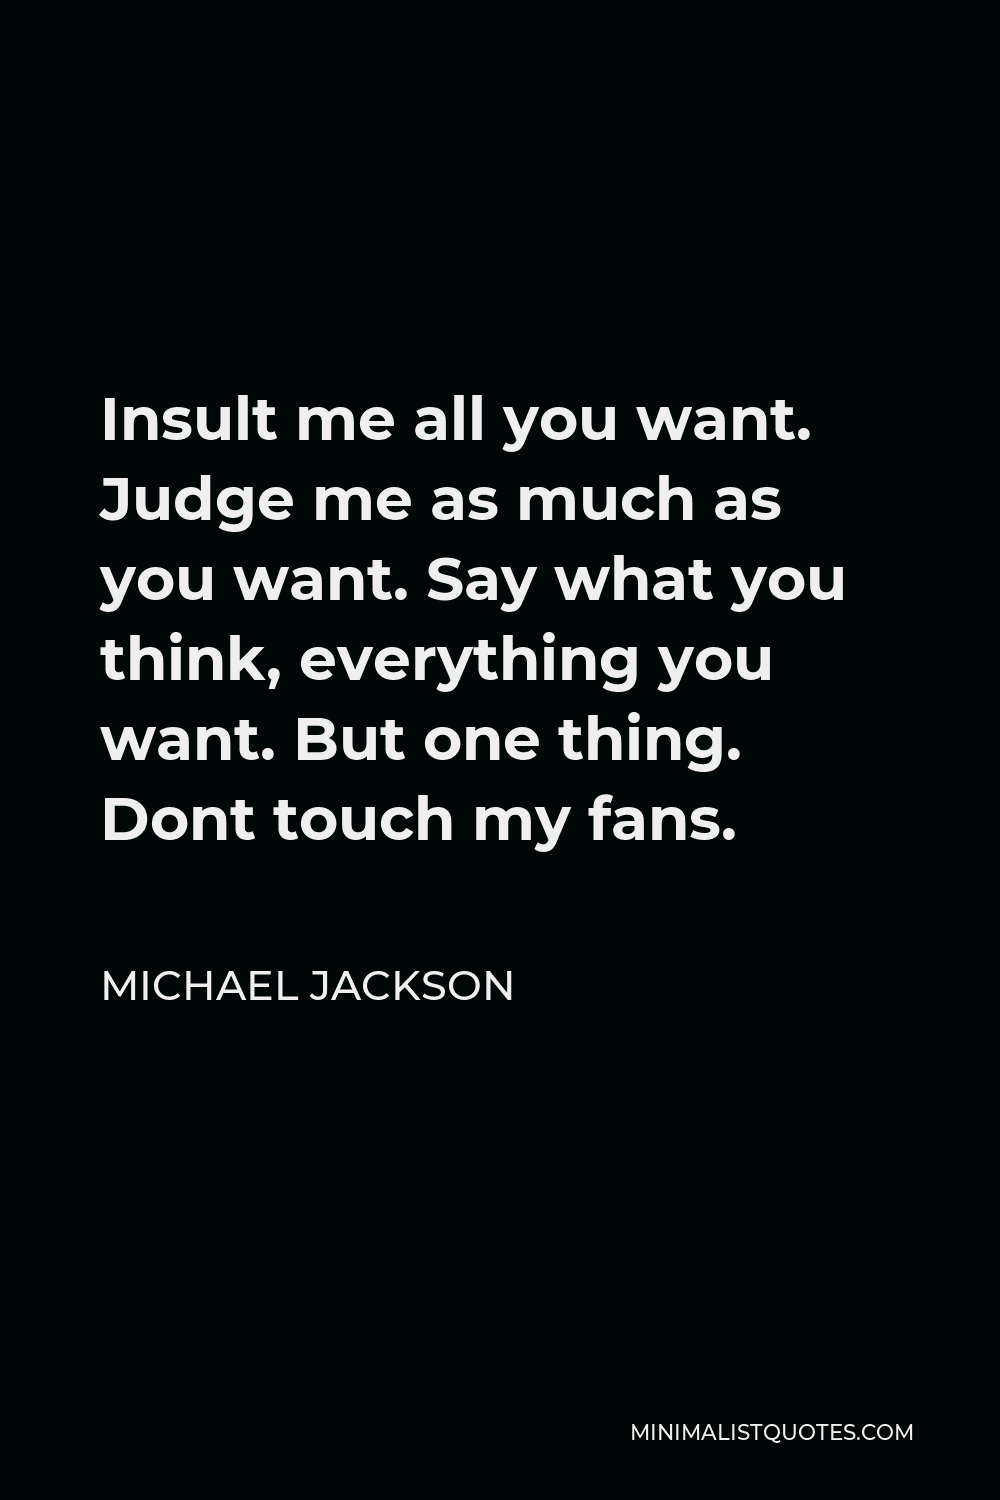 Michael Jackson Quote: Insult Me All You Want. Judge Me As Much As You Want. Say What You Think, Everything You Want. But One Thing. Dont Touch My Fans.